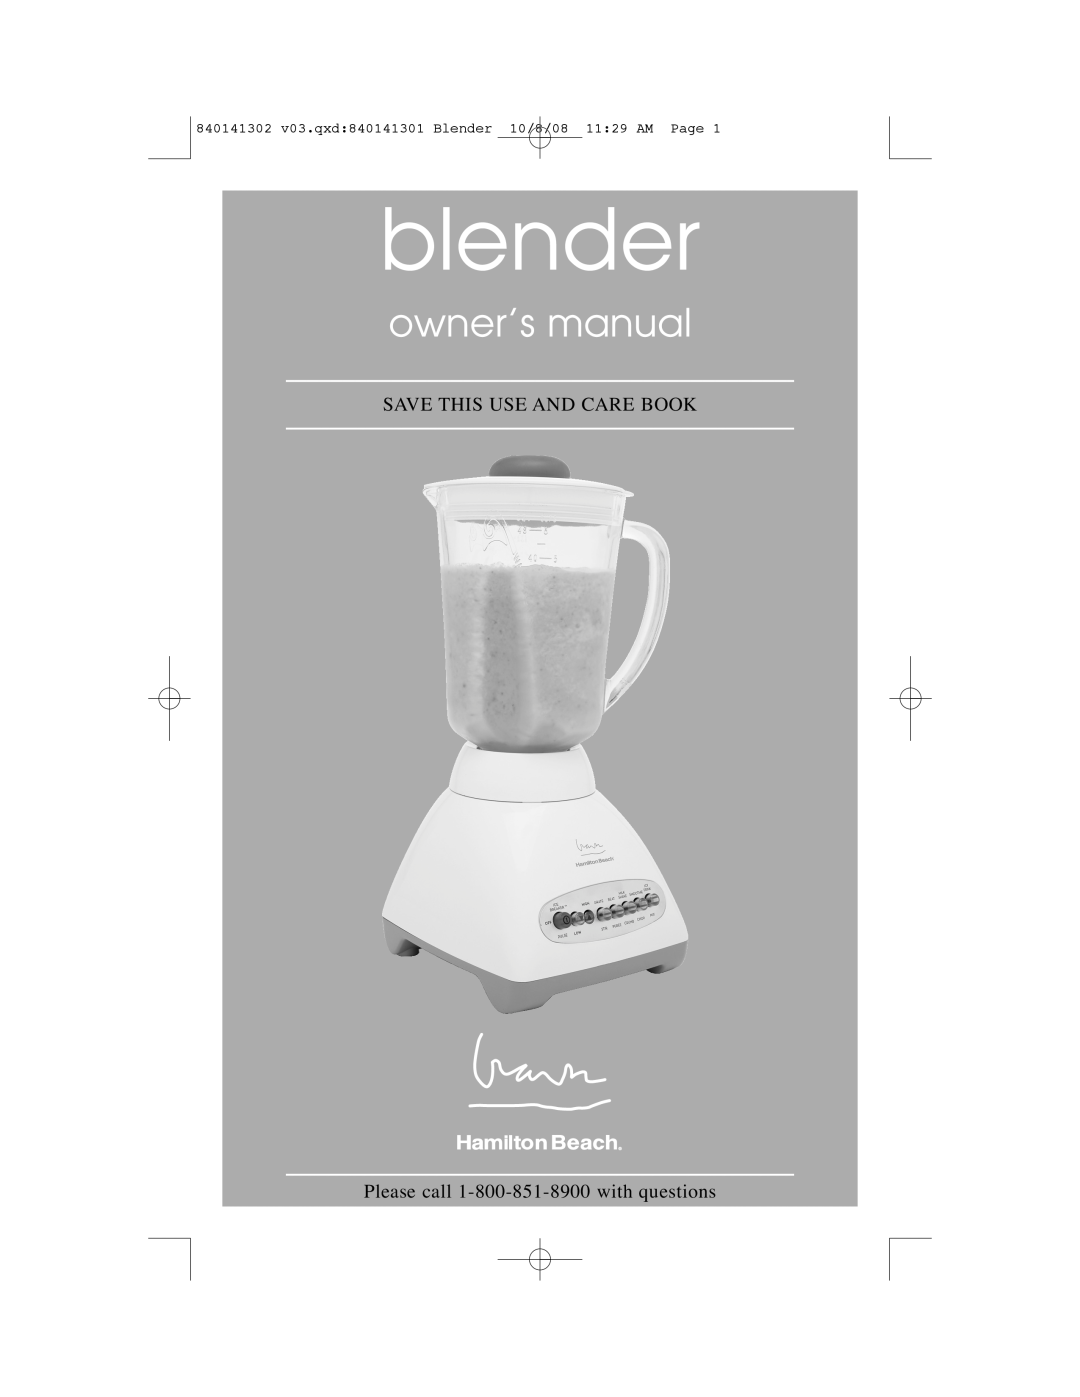 Hamilton Beach 840141302 owner manual blender, Save This Use And Care Book 